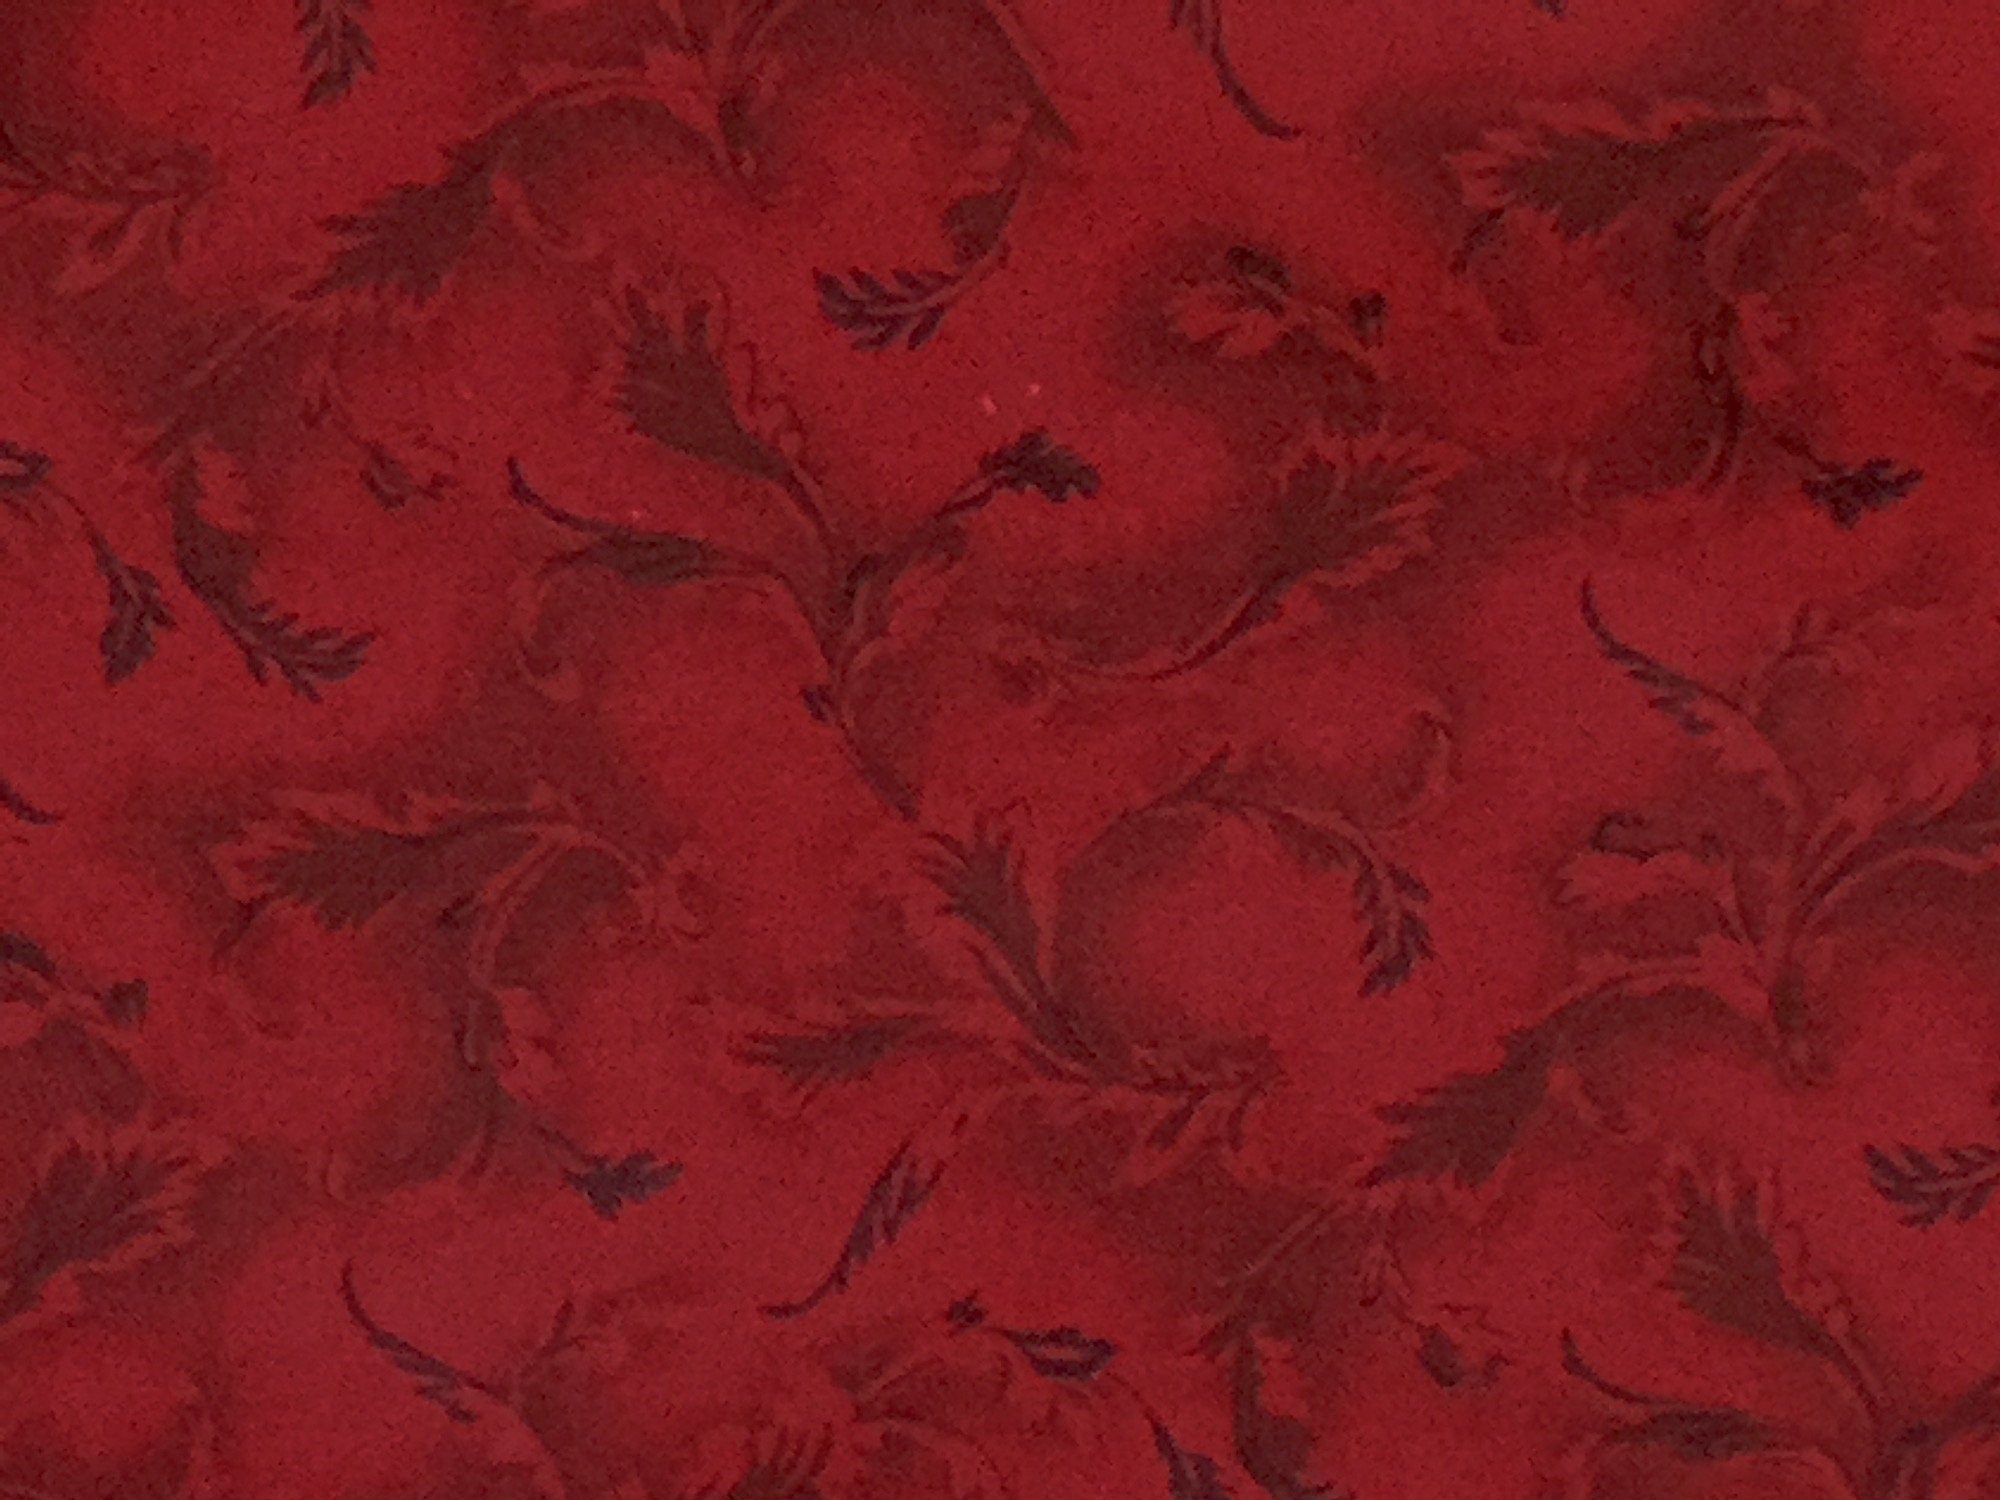 Close up of red cotton fabric covered with leaves.